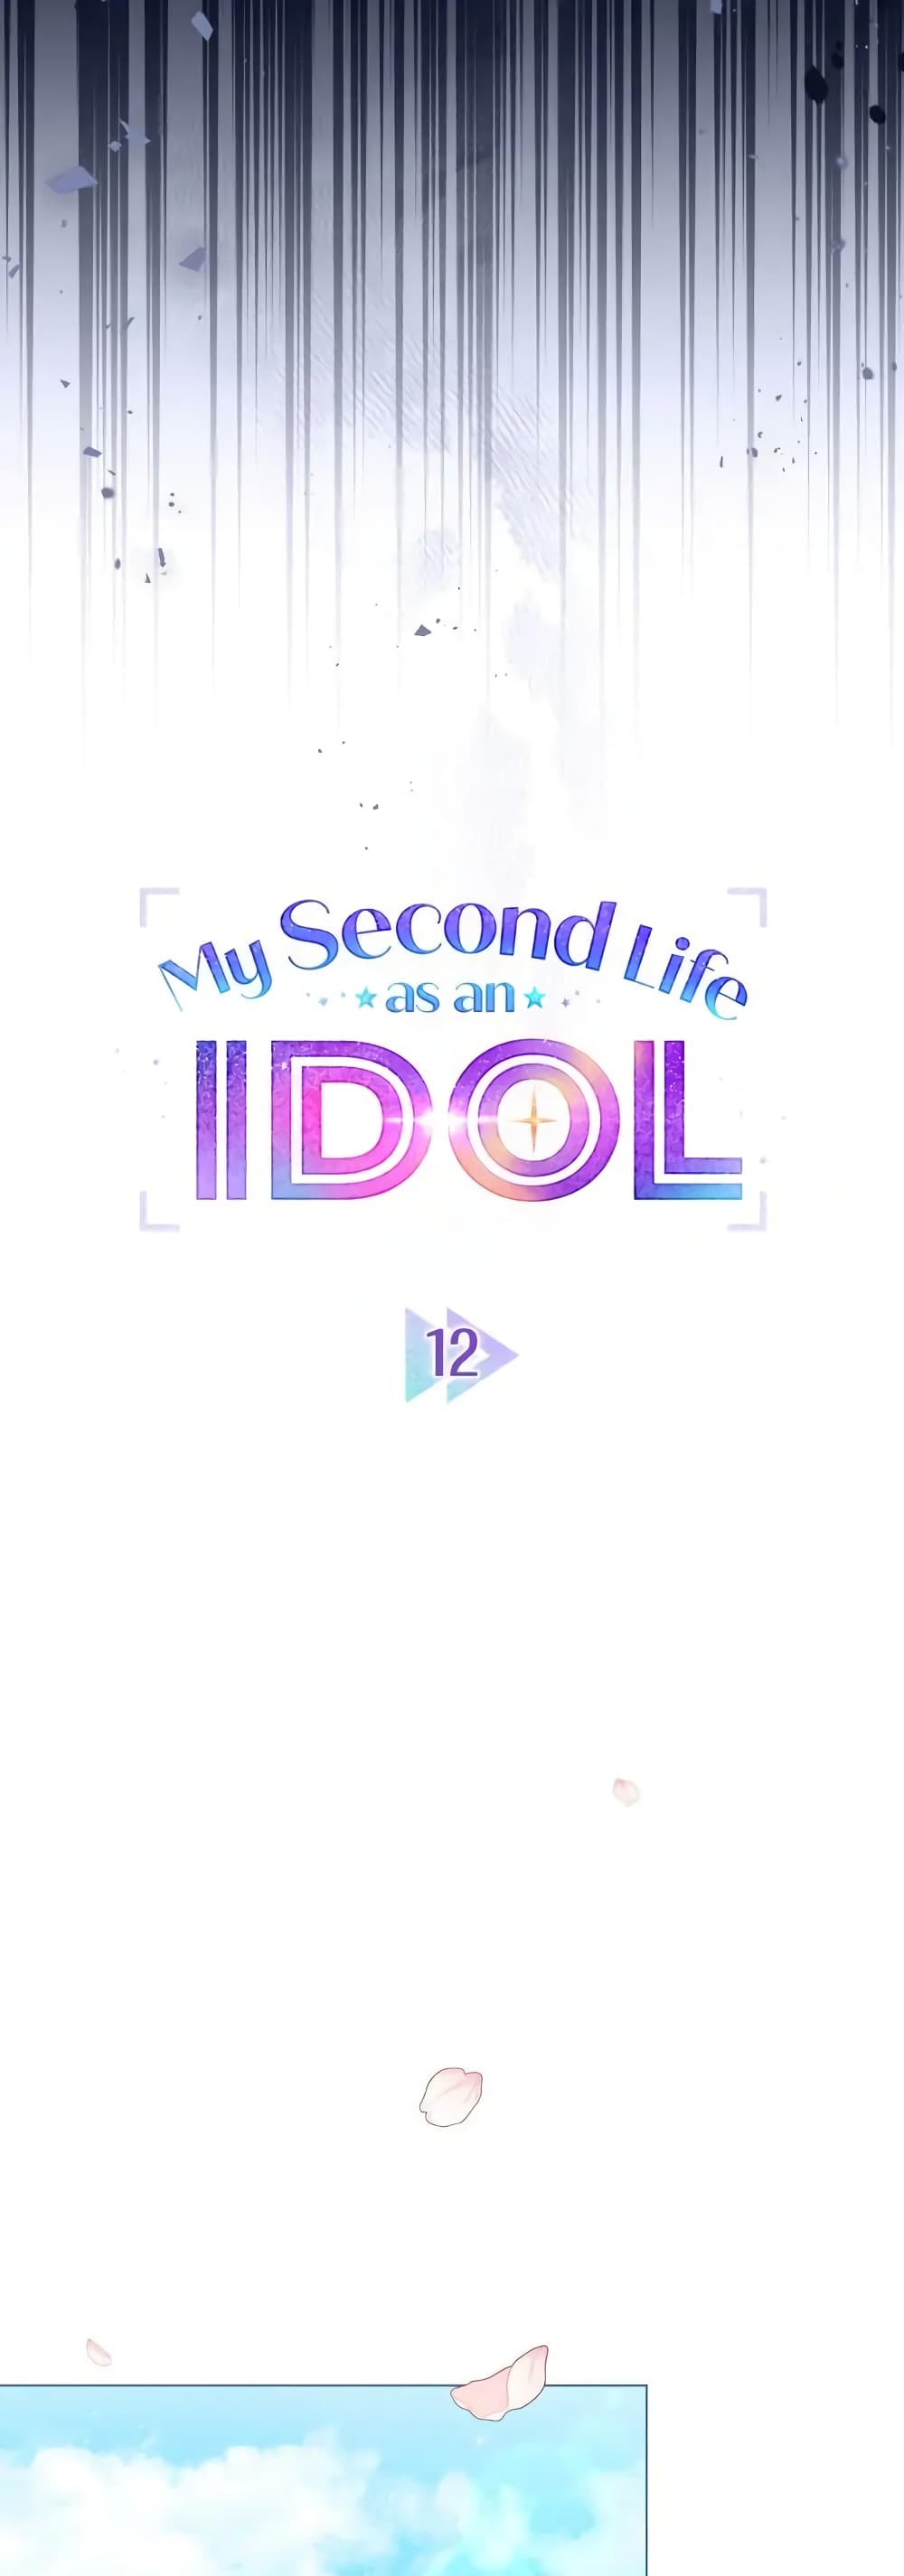 My Second Life as an Idol 12-12